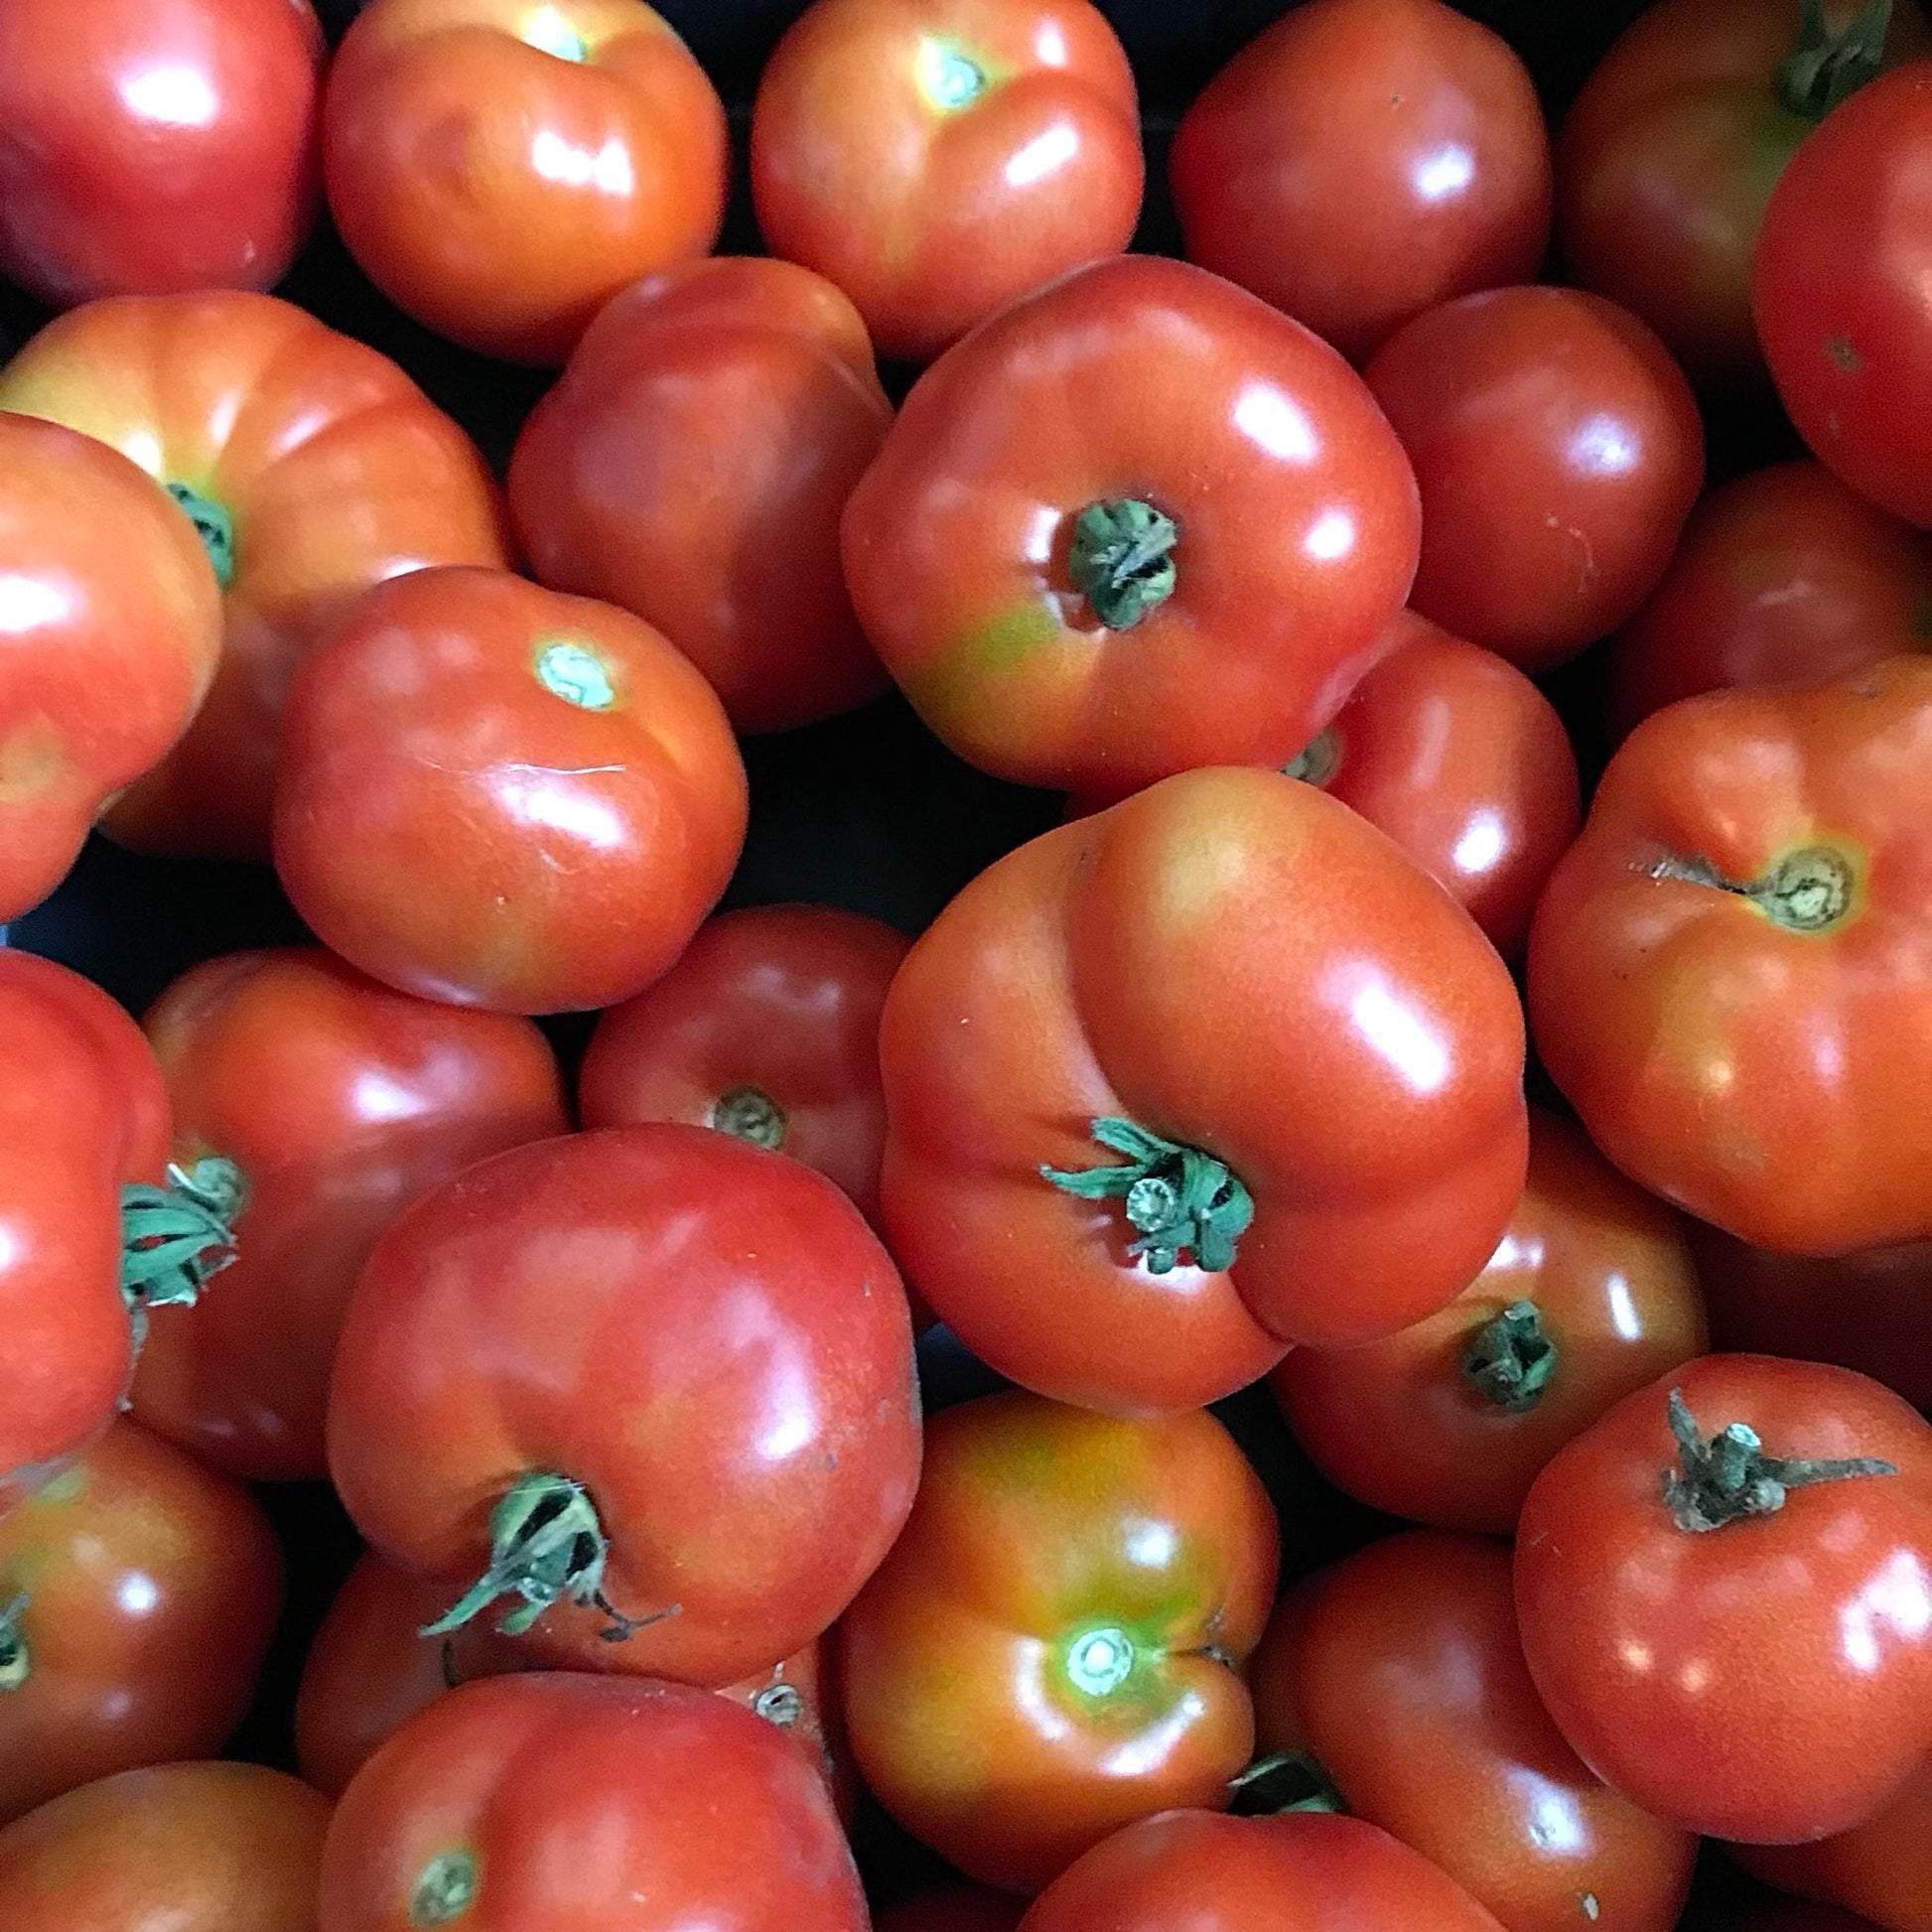 Many glossy round red tomatoes.